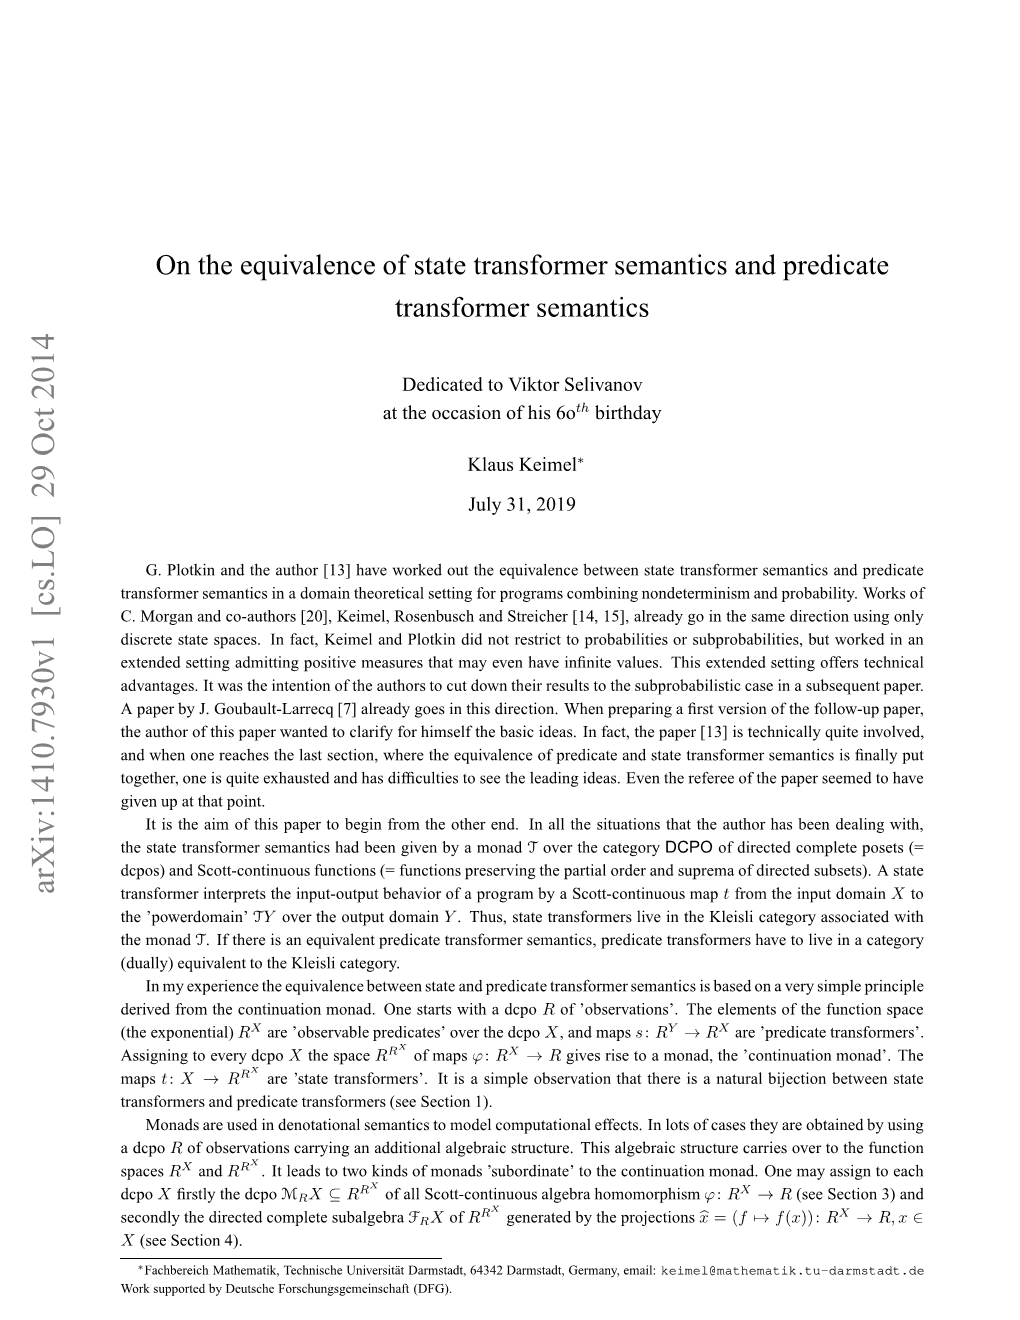 On the Equivalence of State Transformer Semantics And